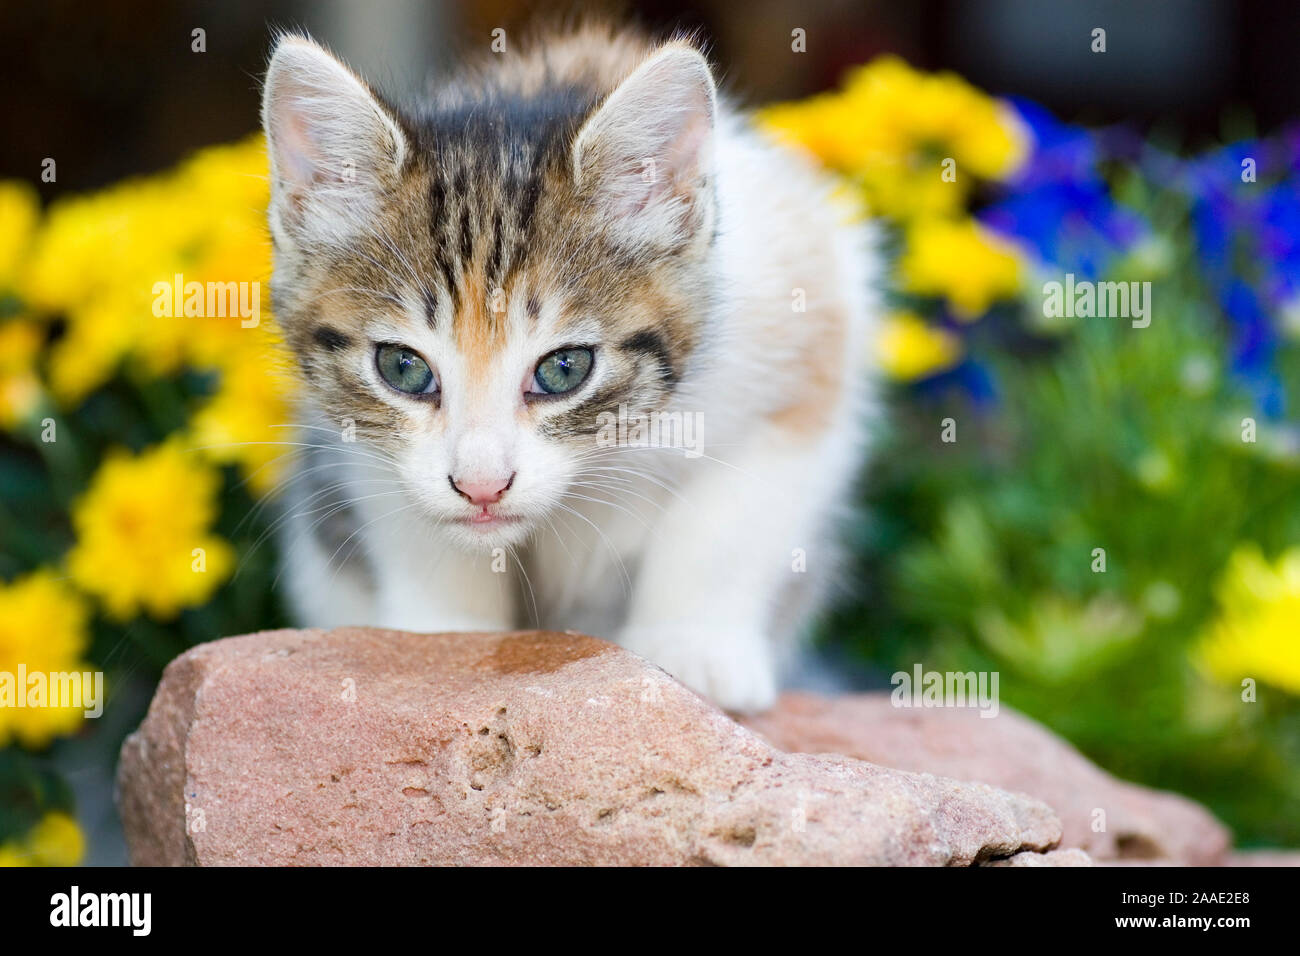 Page 2 - Stein Auf Stein High Resolution Stock Photography and Images -  Alamy